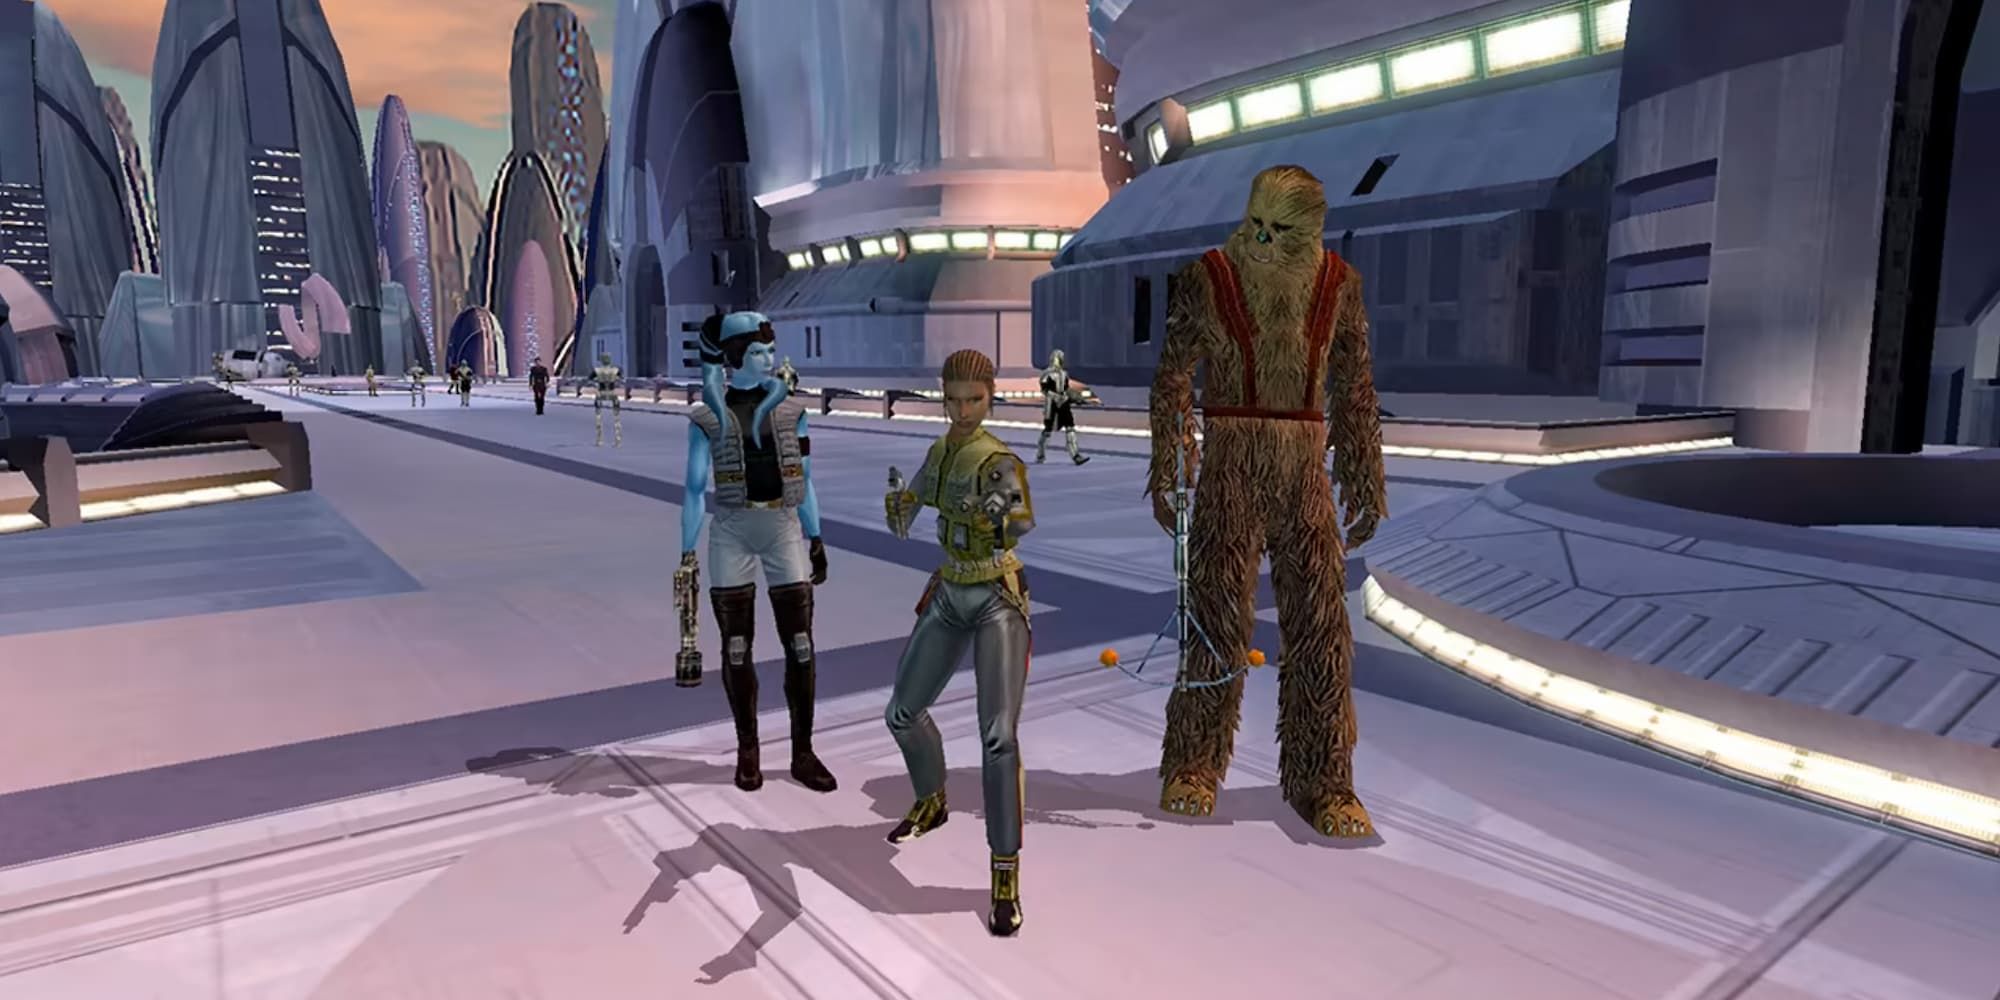 The player character of Revan stands on Taris with Mission Vao and Zaalbar the wookie in KOTOR.